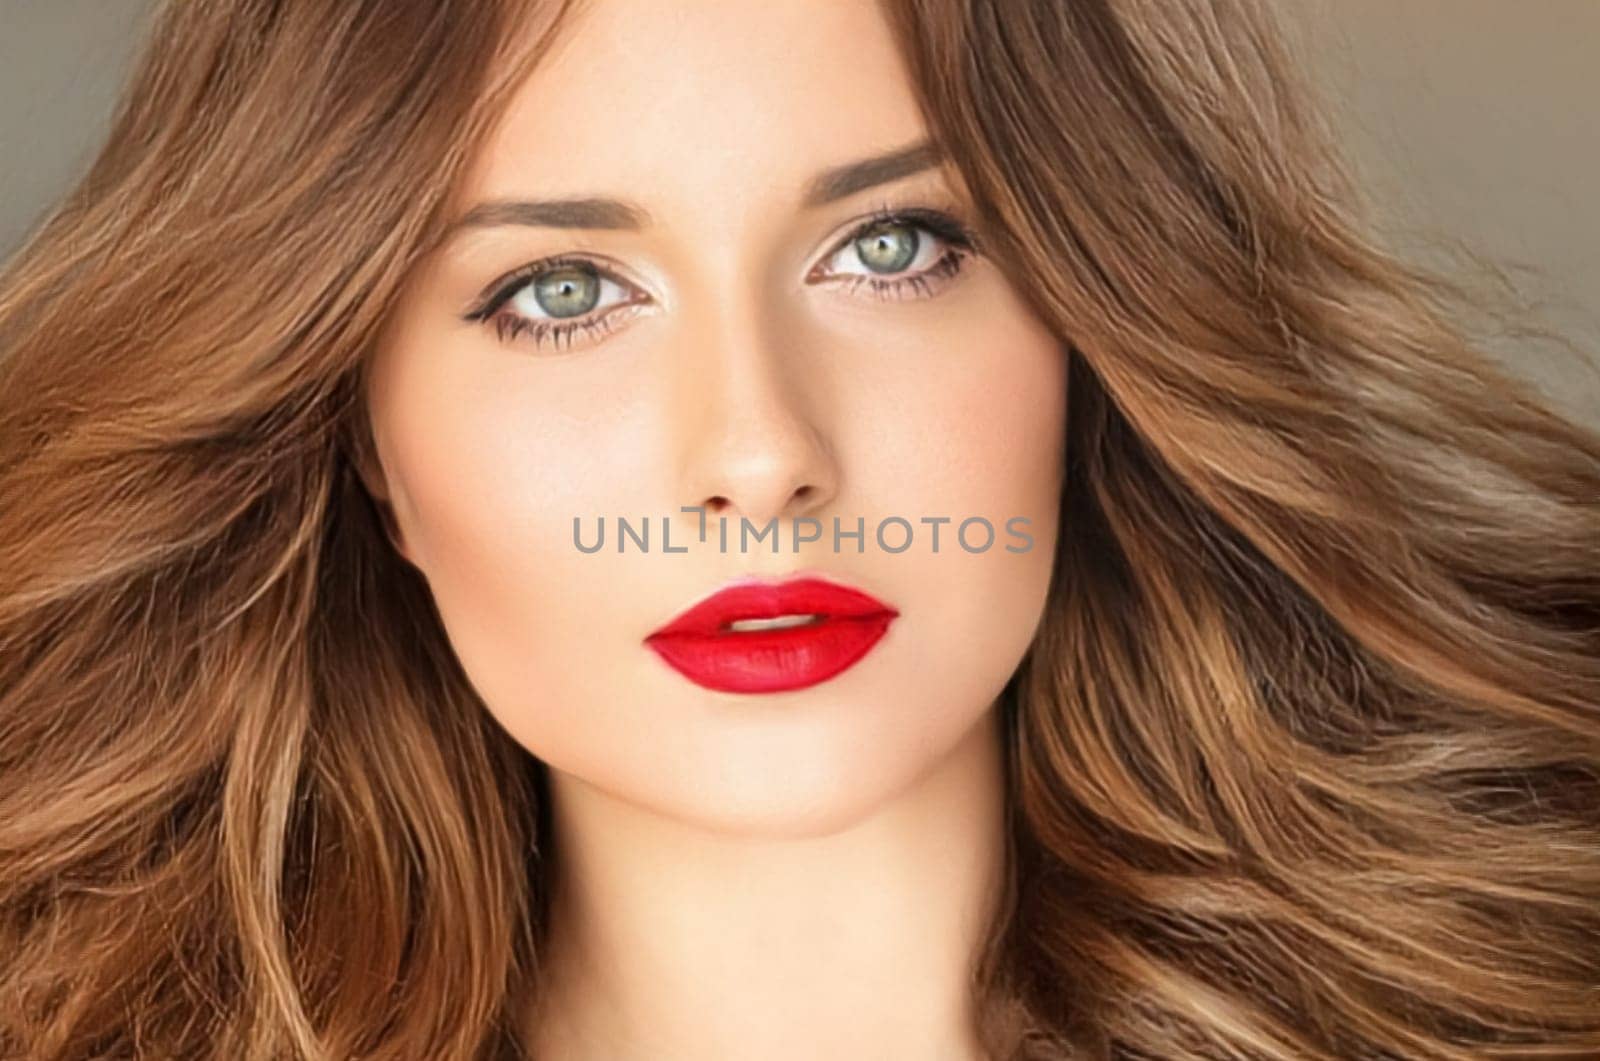 Beauty, makeup and hairstyle, face portrait of beautiful woman, red lipstick make-up and hair styling for skincare cosmetics, hair care, glamour style and fashion look idea